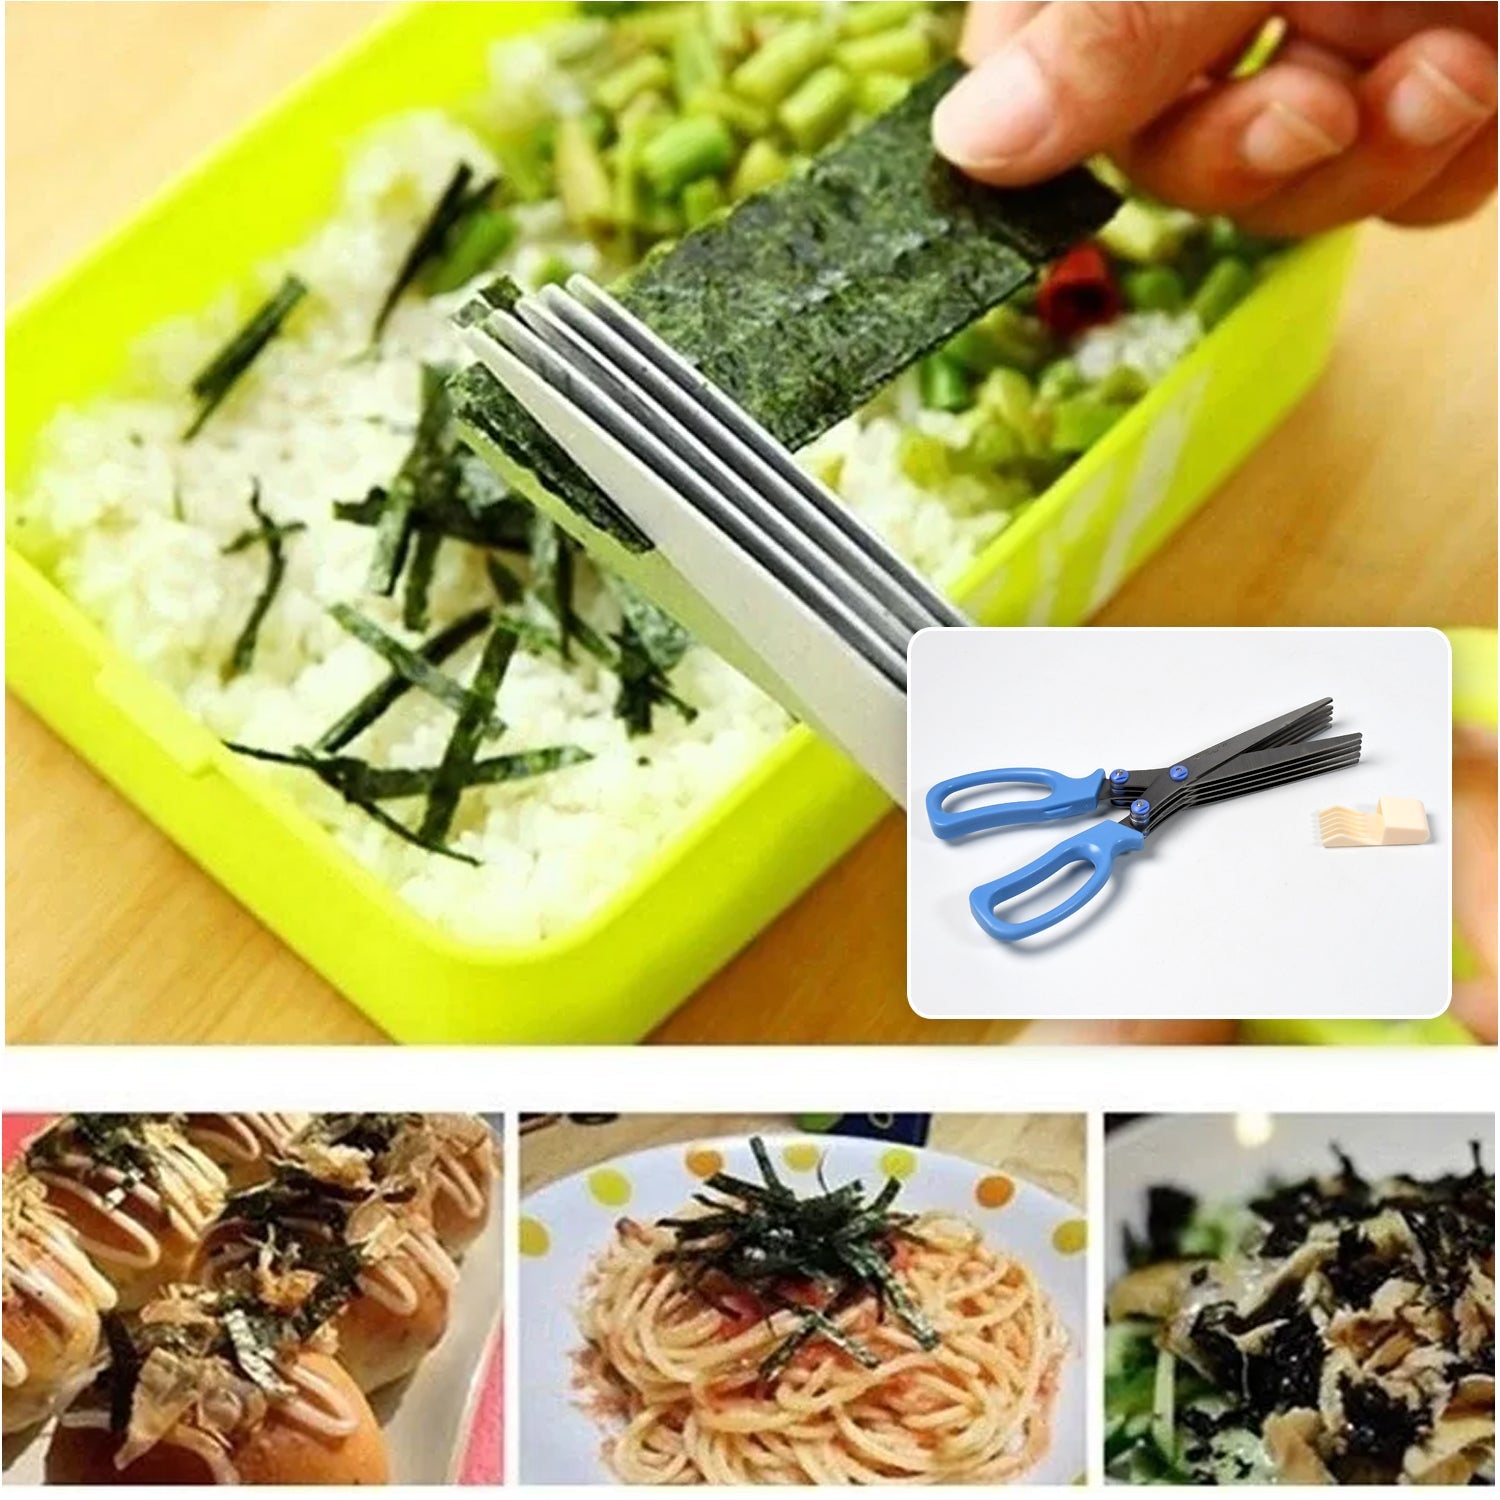 1563A MULTIFUNCTION VEGETABLE STAINLESS STEEL HERBS SCISSOR WITH 5 BLADES DeoDap